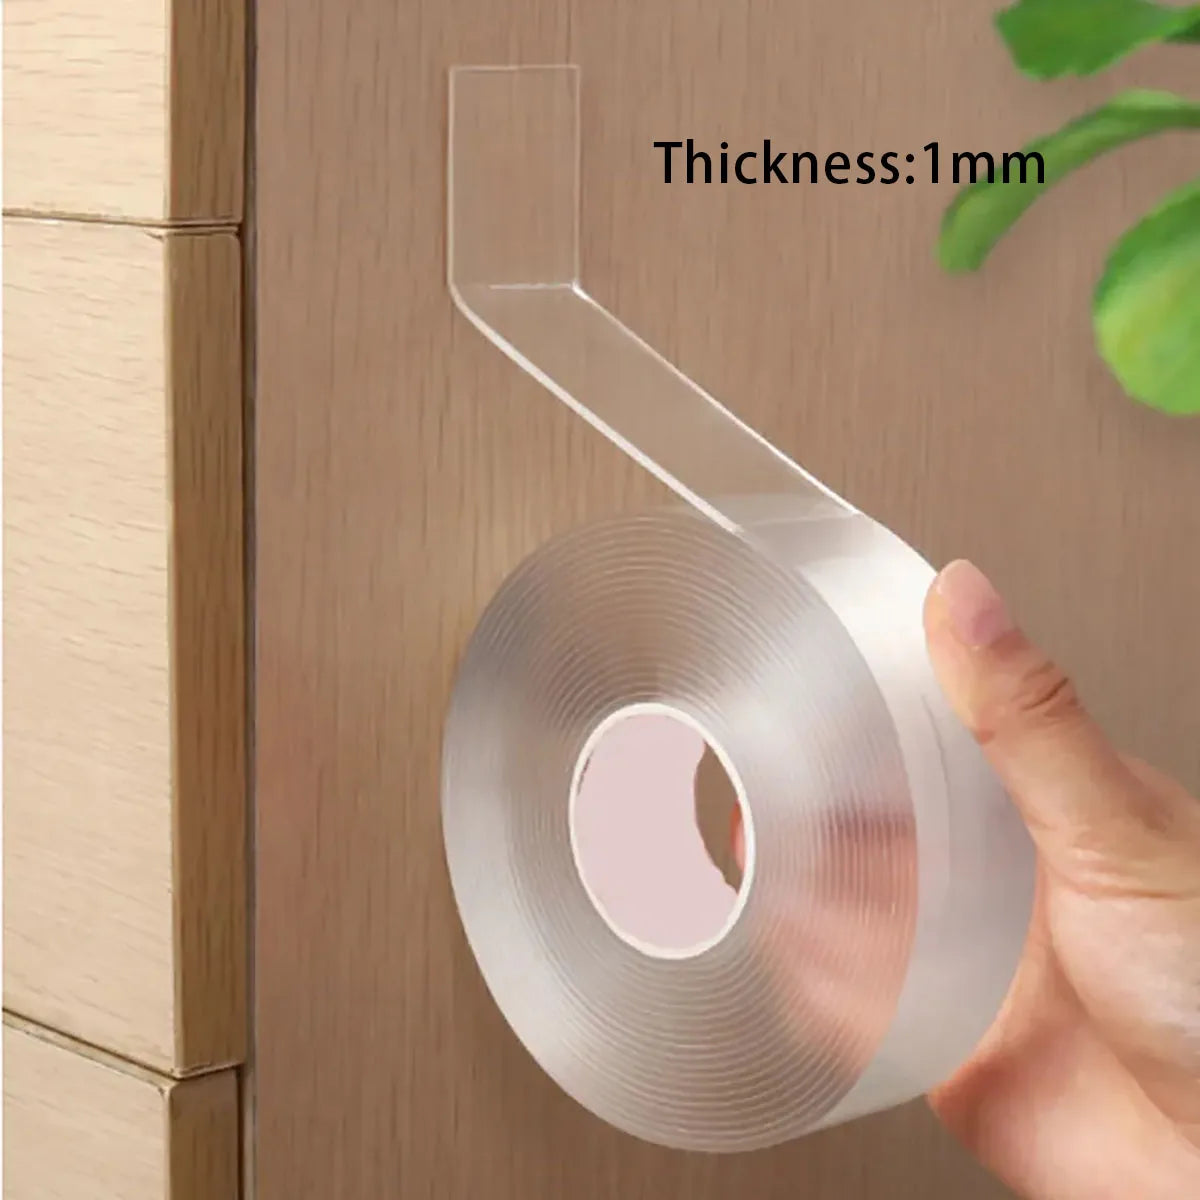 Ultra-Strong Double Sided Adhesive Tape - Home Improvement Essential